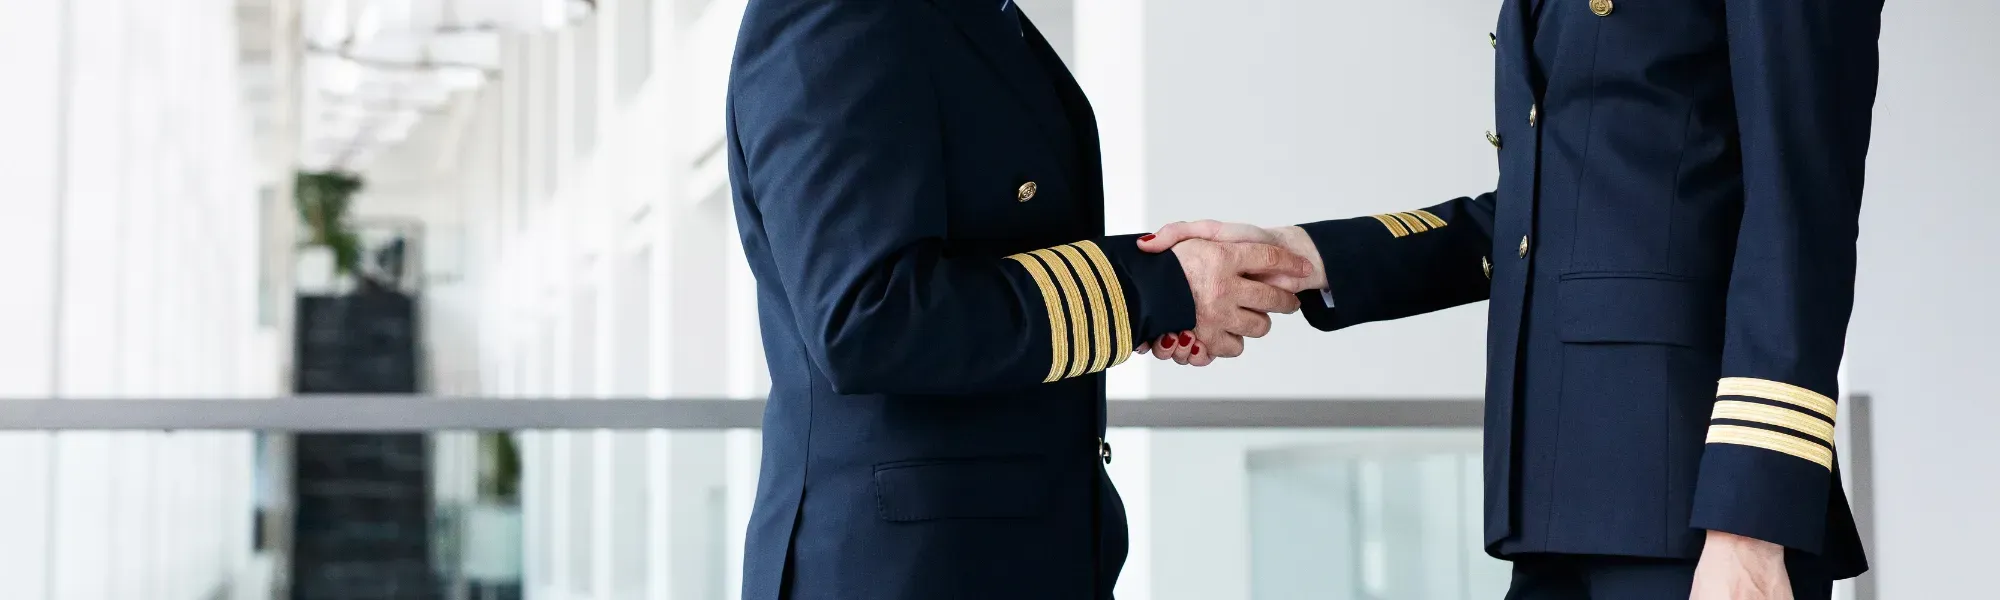 5 Reasons Why Pilots Should Partner With A Recruiter